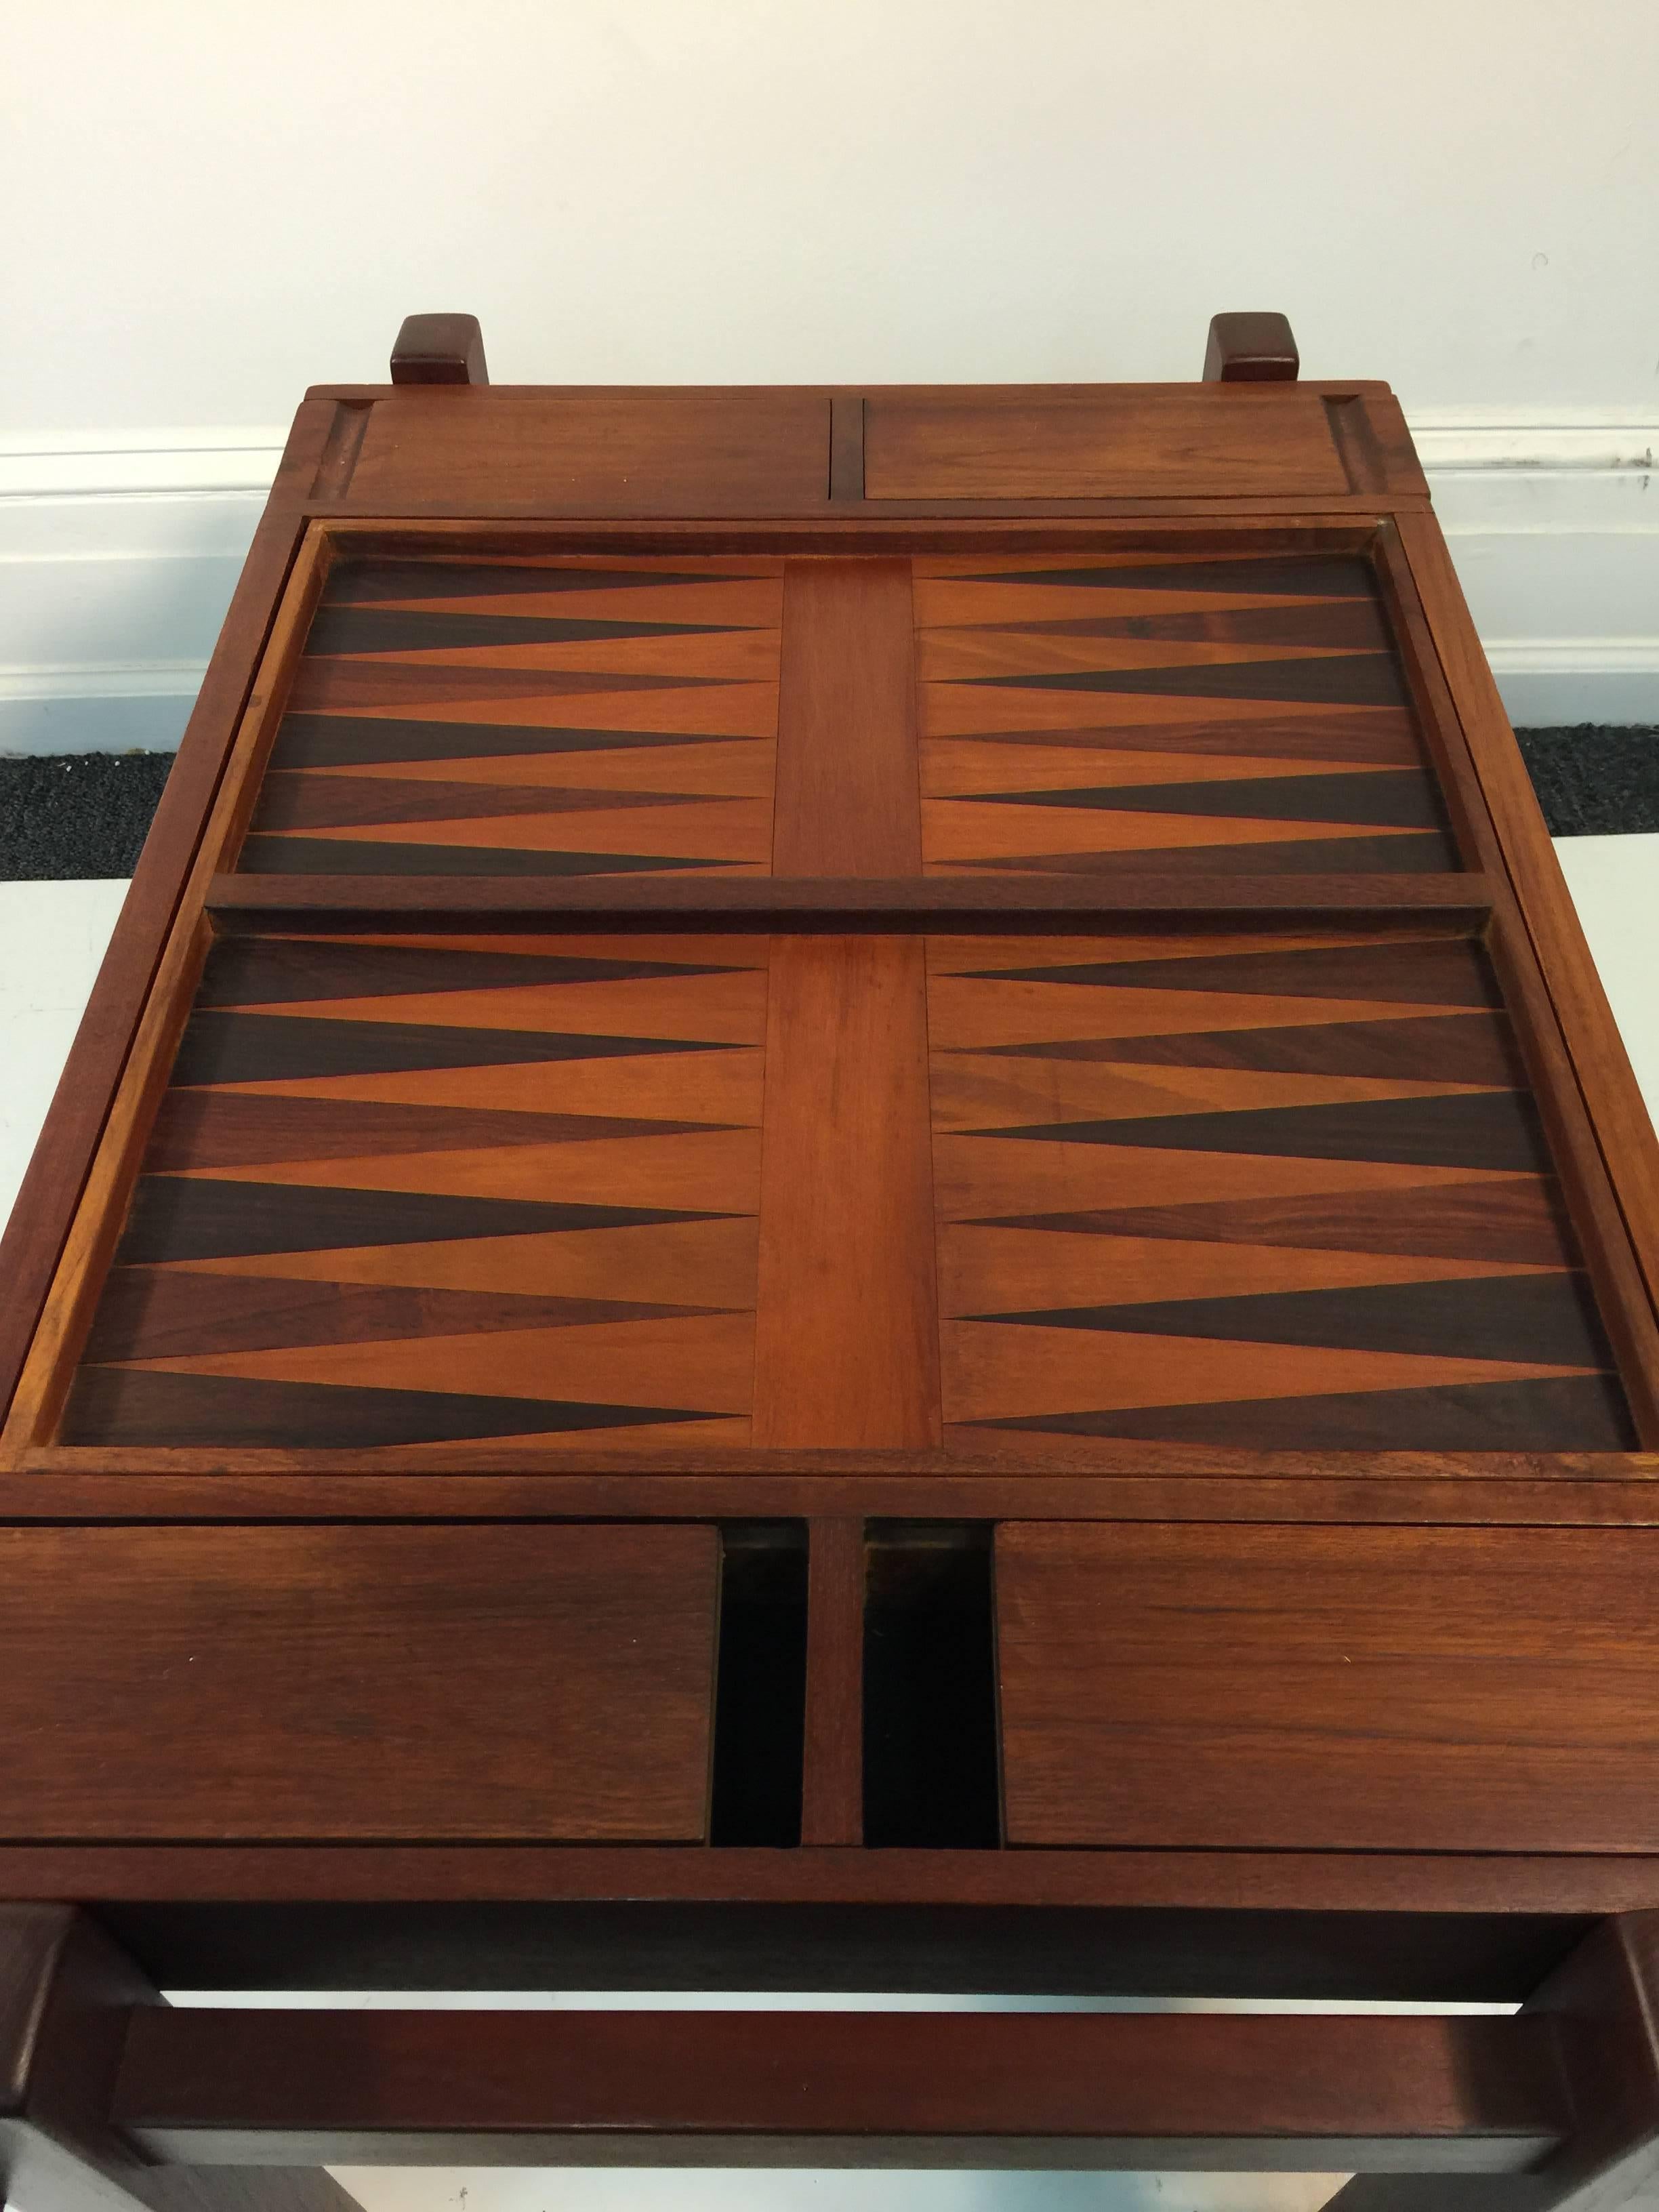 A fantastic Scandinavian Modern teak and rosewood game table for backgammon and chess made in Denmark with sliding compartments for game pieces.